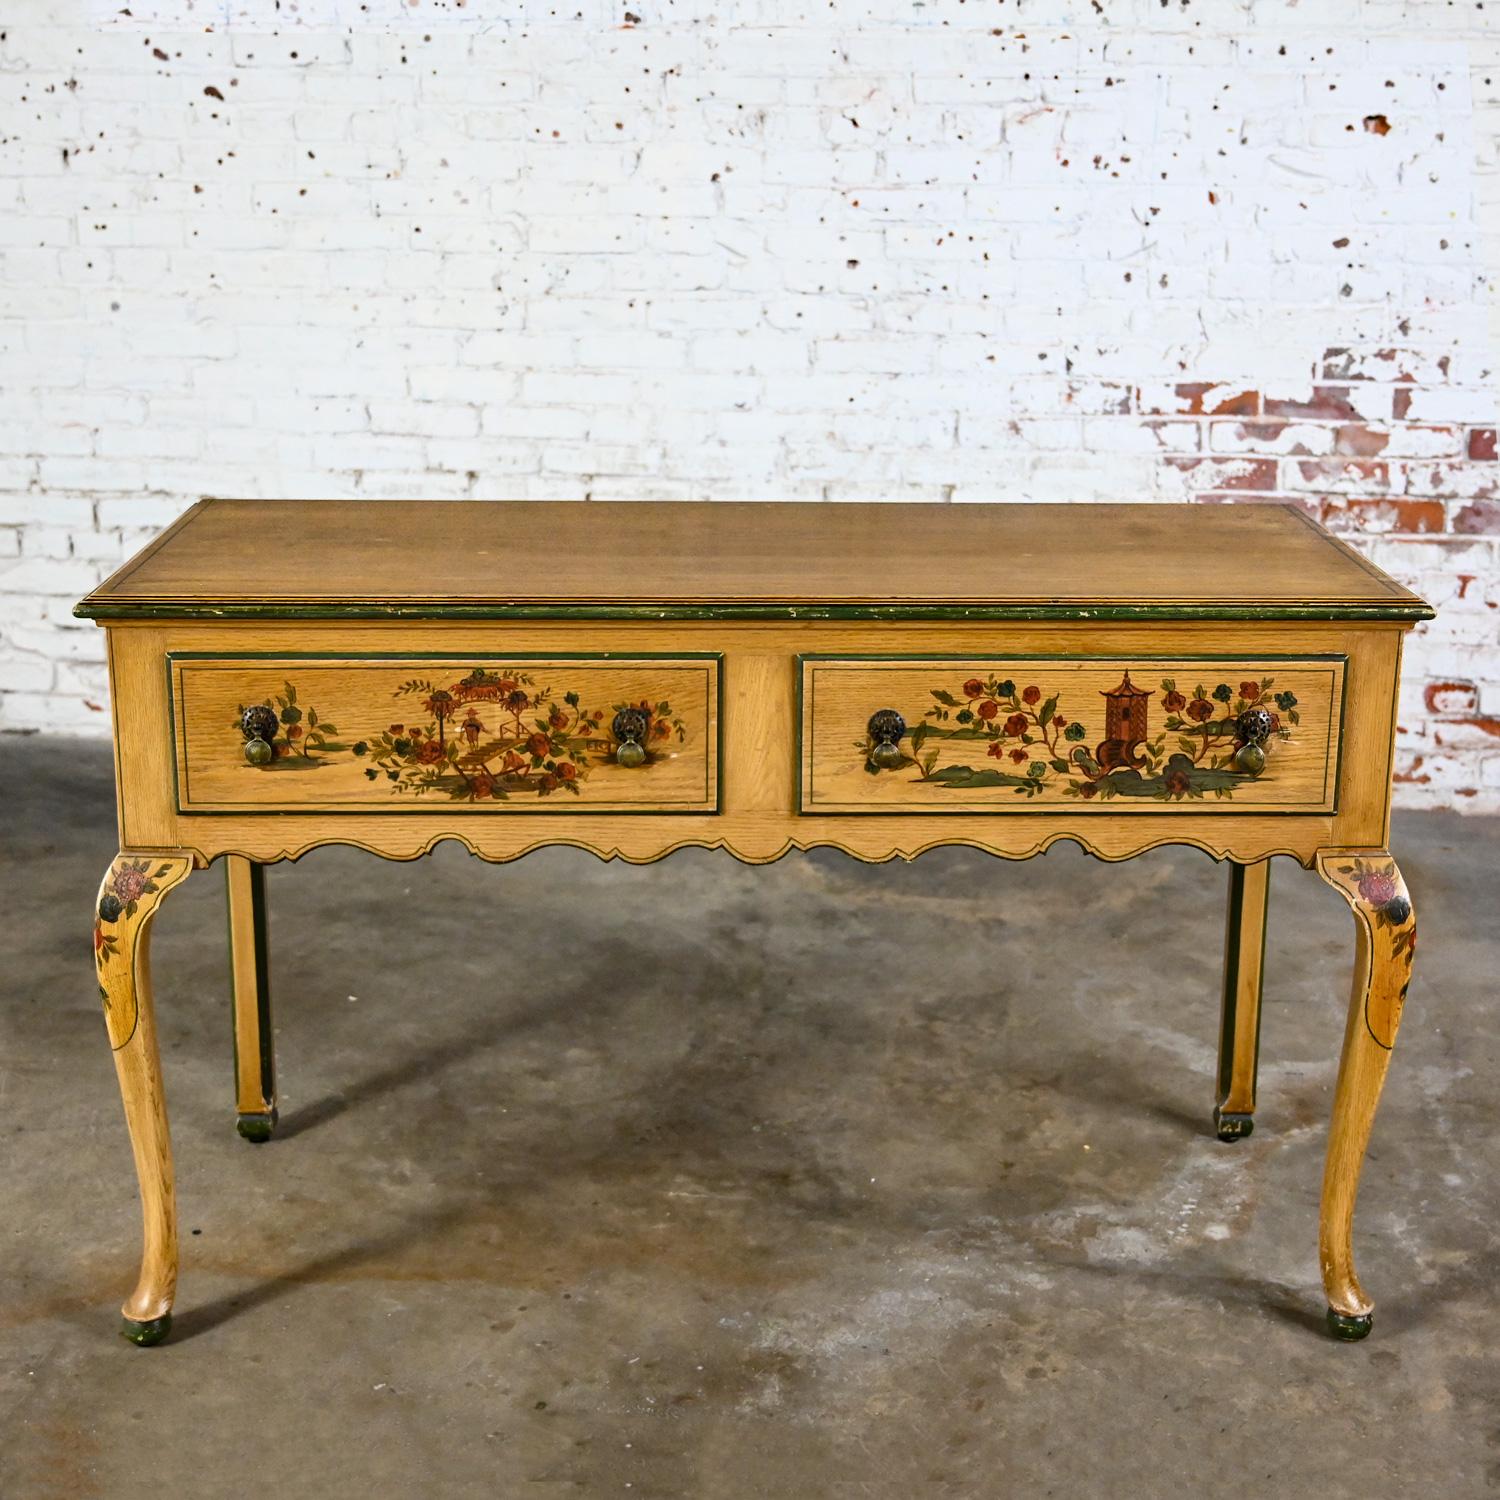 North American Antique Chinoiserie Hunt Style Buffet Sideboard Server Hand Painted Cabriole Leg For Sale